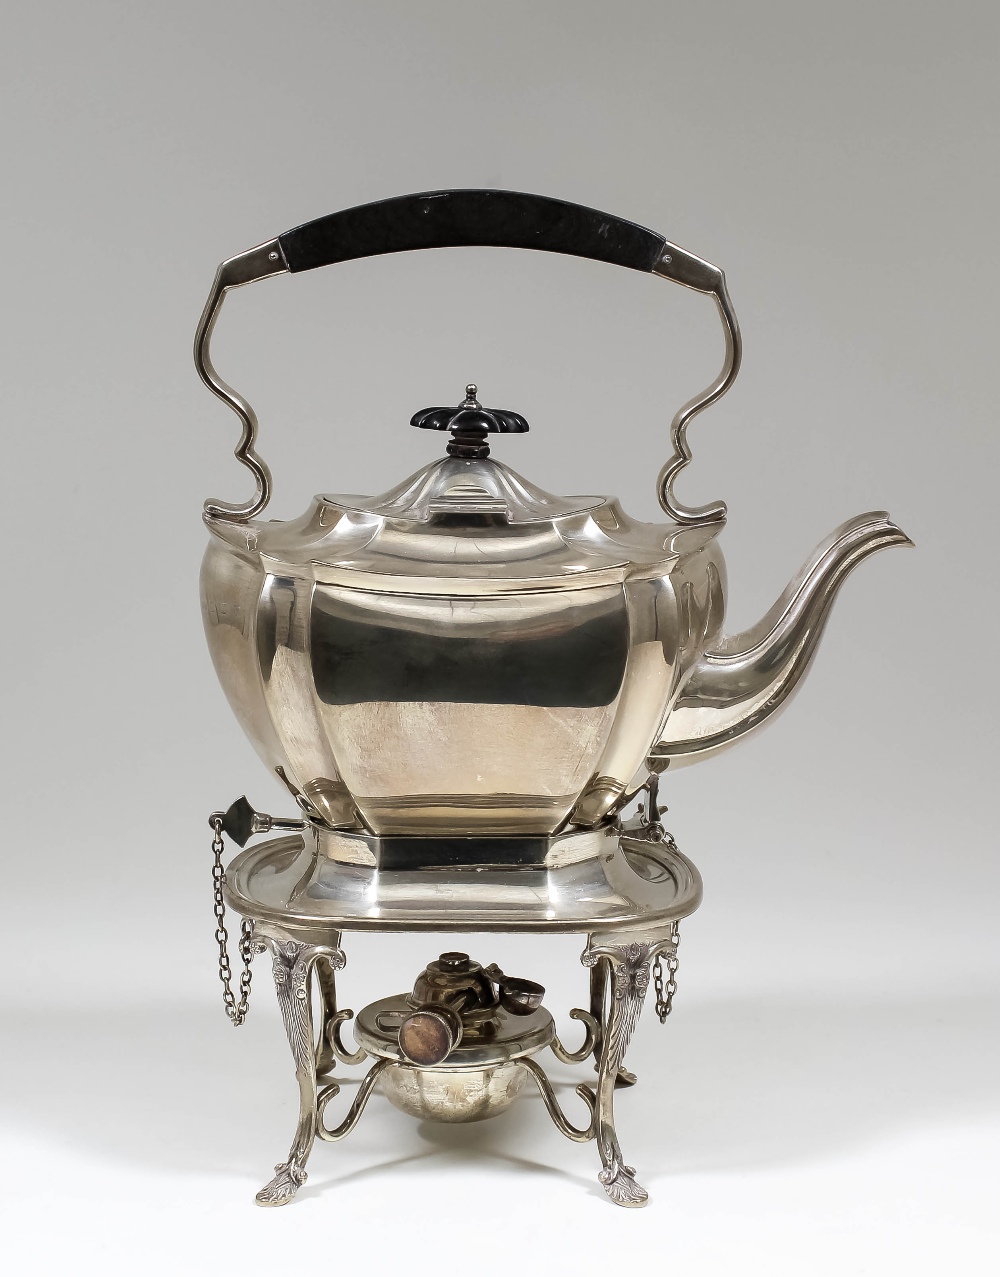 A George V silver rectangular tea kettle on stand with spirit lamp, the tea kettle with panelled